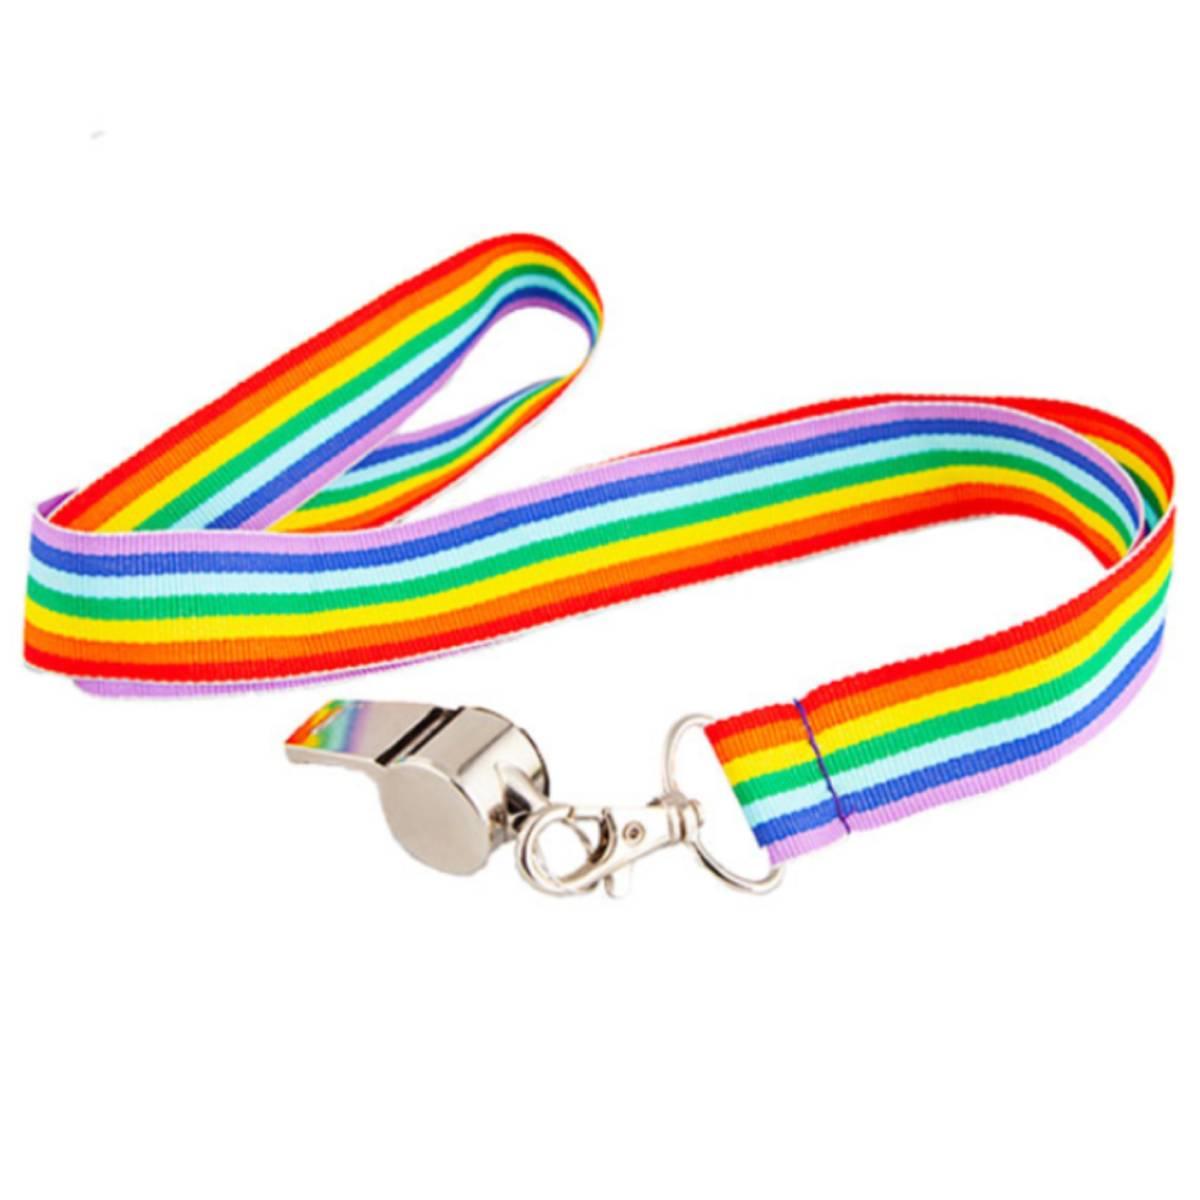 Metal Whistle on Rainbow Lanyard by Wicked Costumes AC-9089 available here at Karnival Costumes online party shop